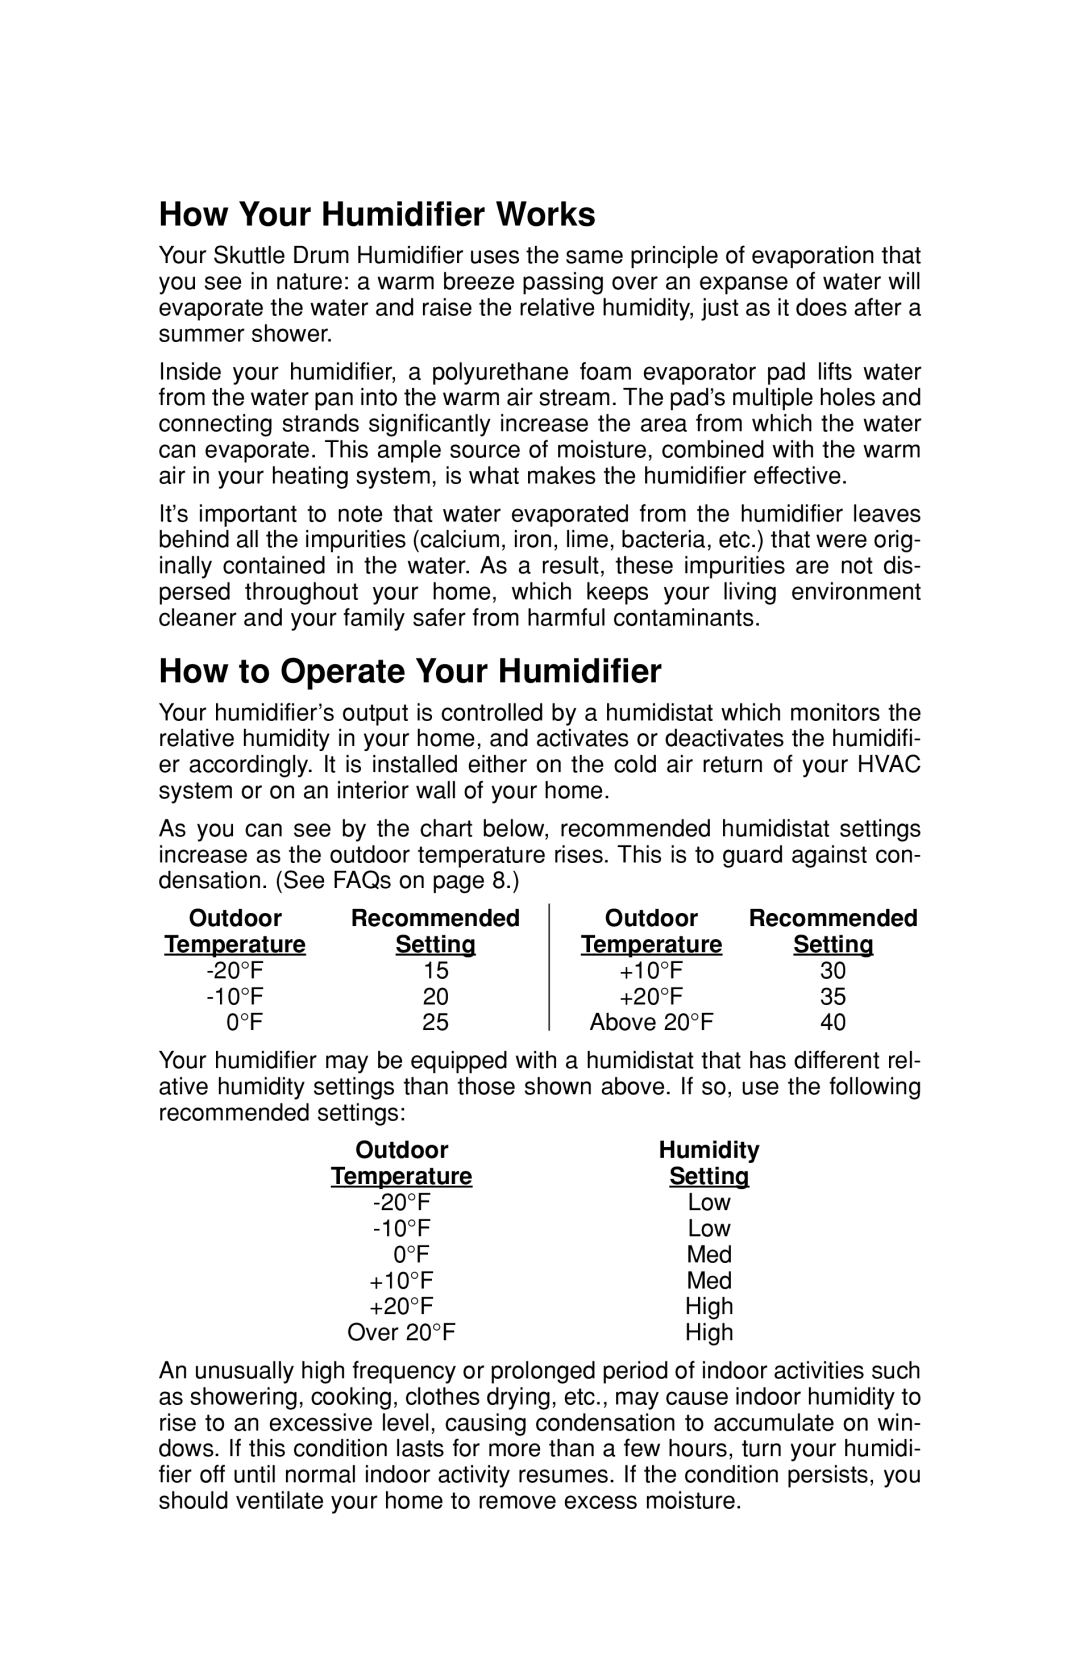 Skuttle Indoor Air Quality Products 45, 190 How Your Humidifier Works, How to Operate Your Humidifier, Outdoor, Setting 